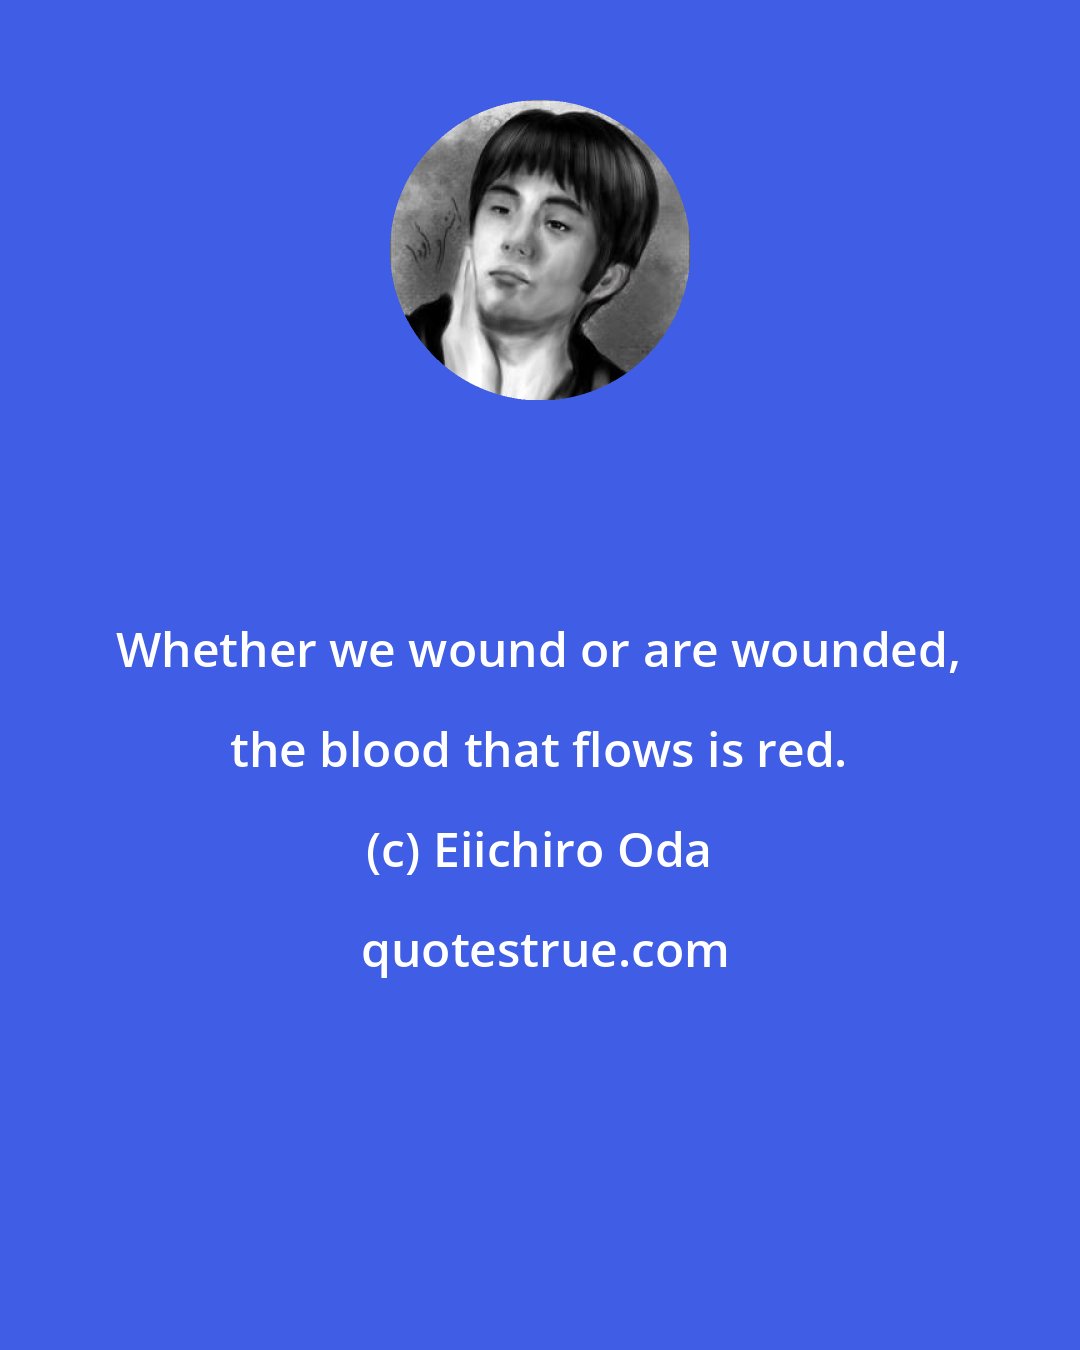 Eiichiro Oda: Whether we wound or are wounded, the blood that flows is red.